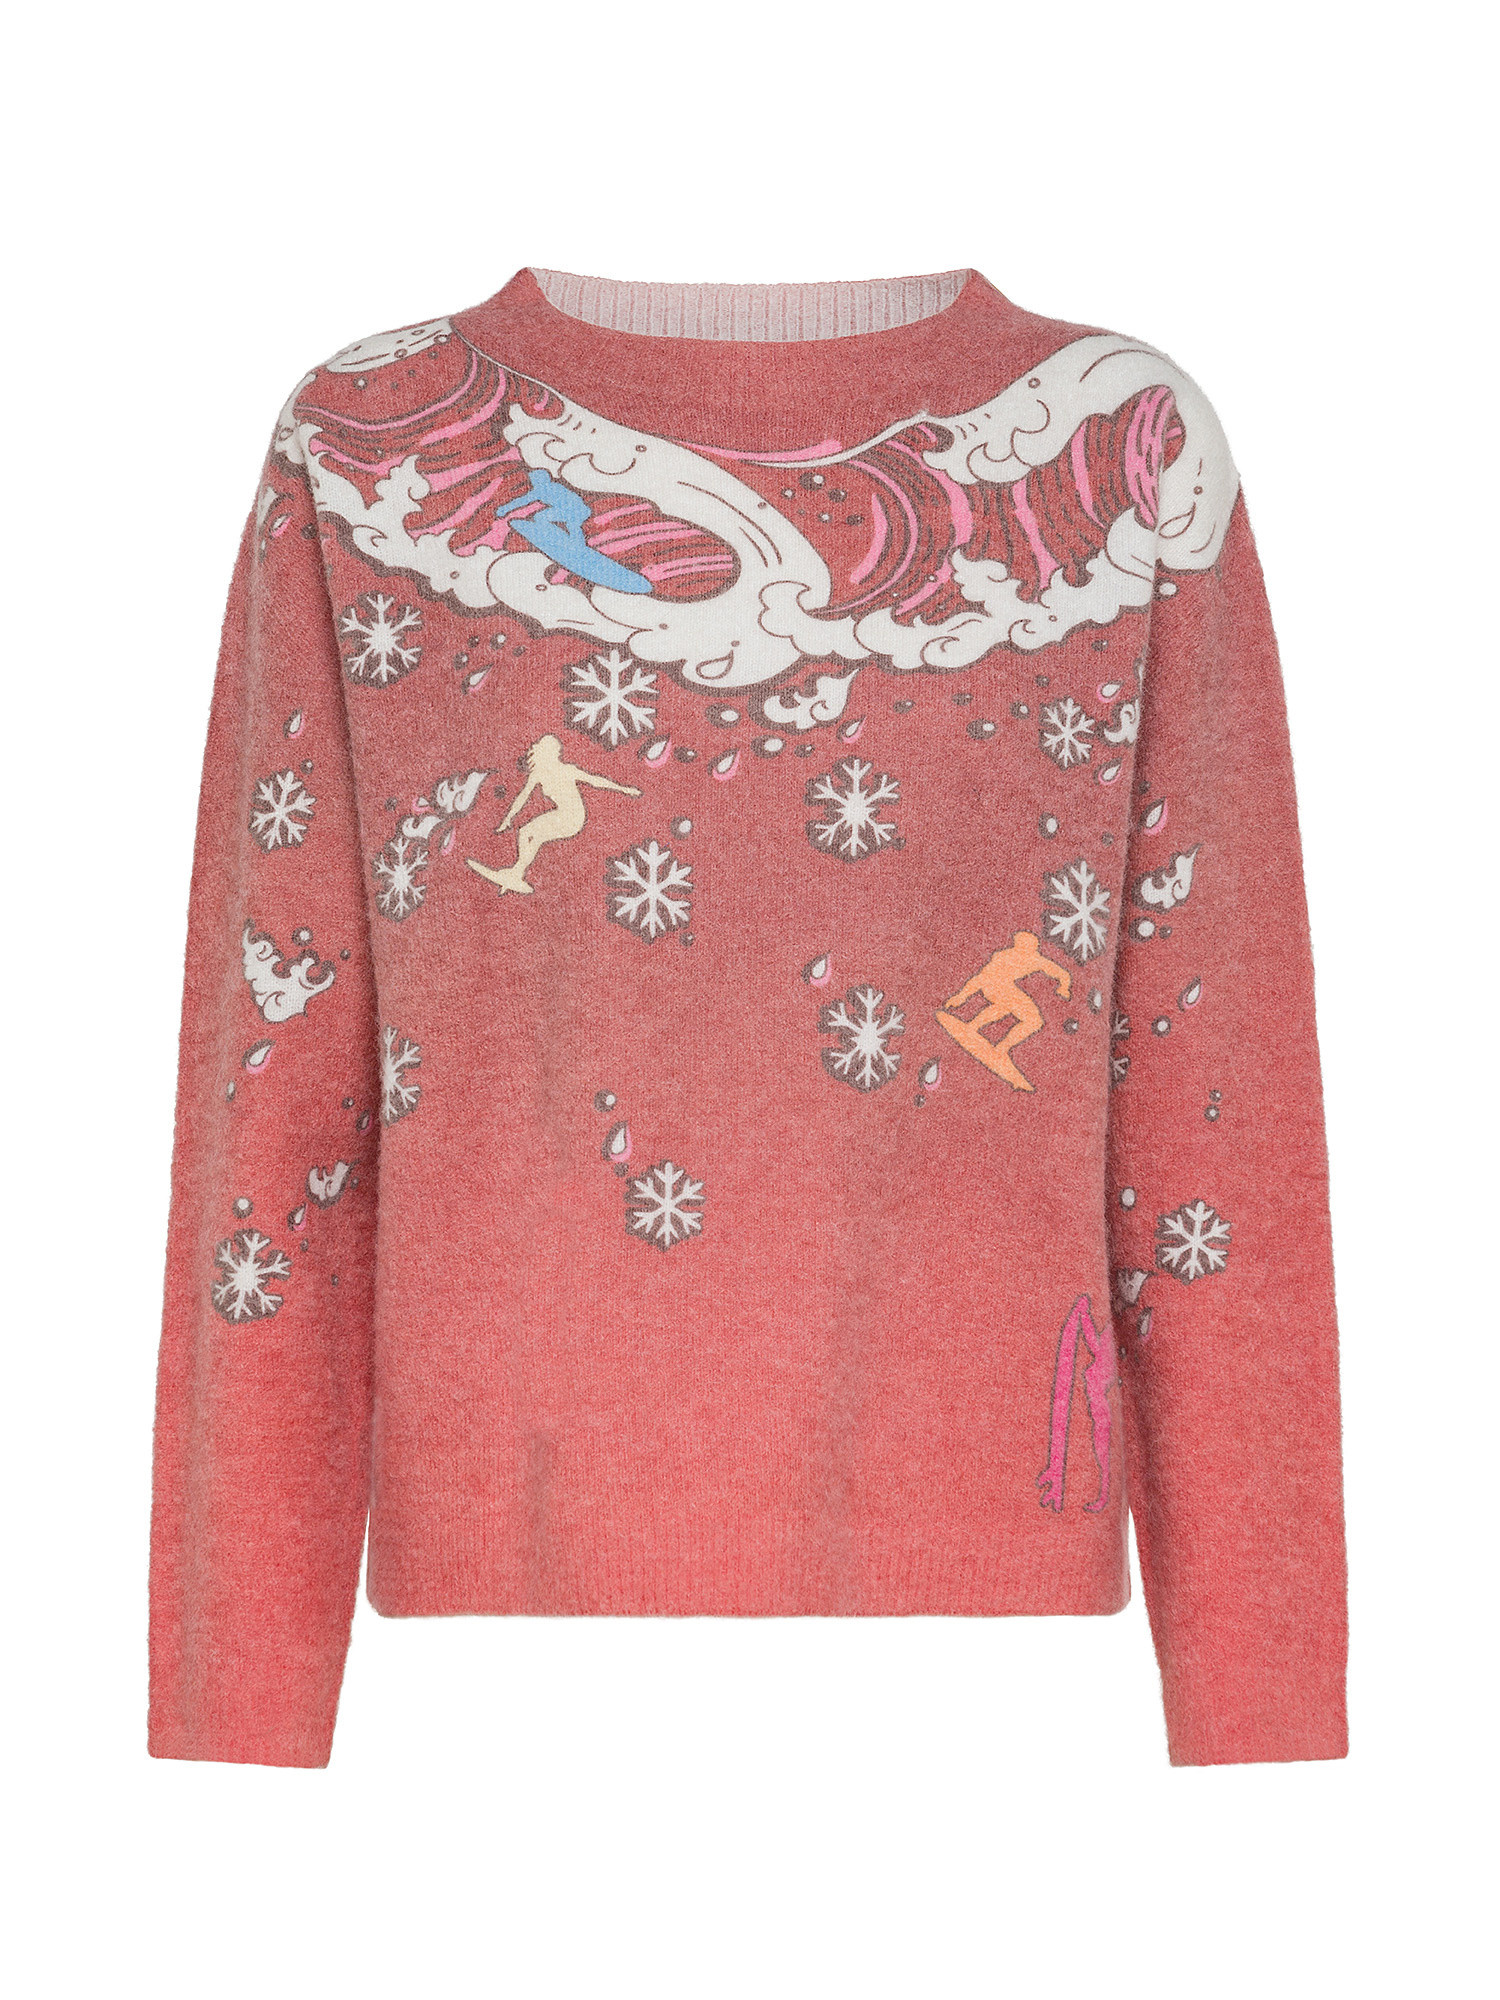 The Surfer's Christmas sweater by Paula Cademartori, Red, large image number 0